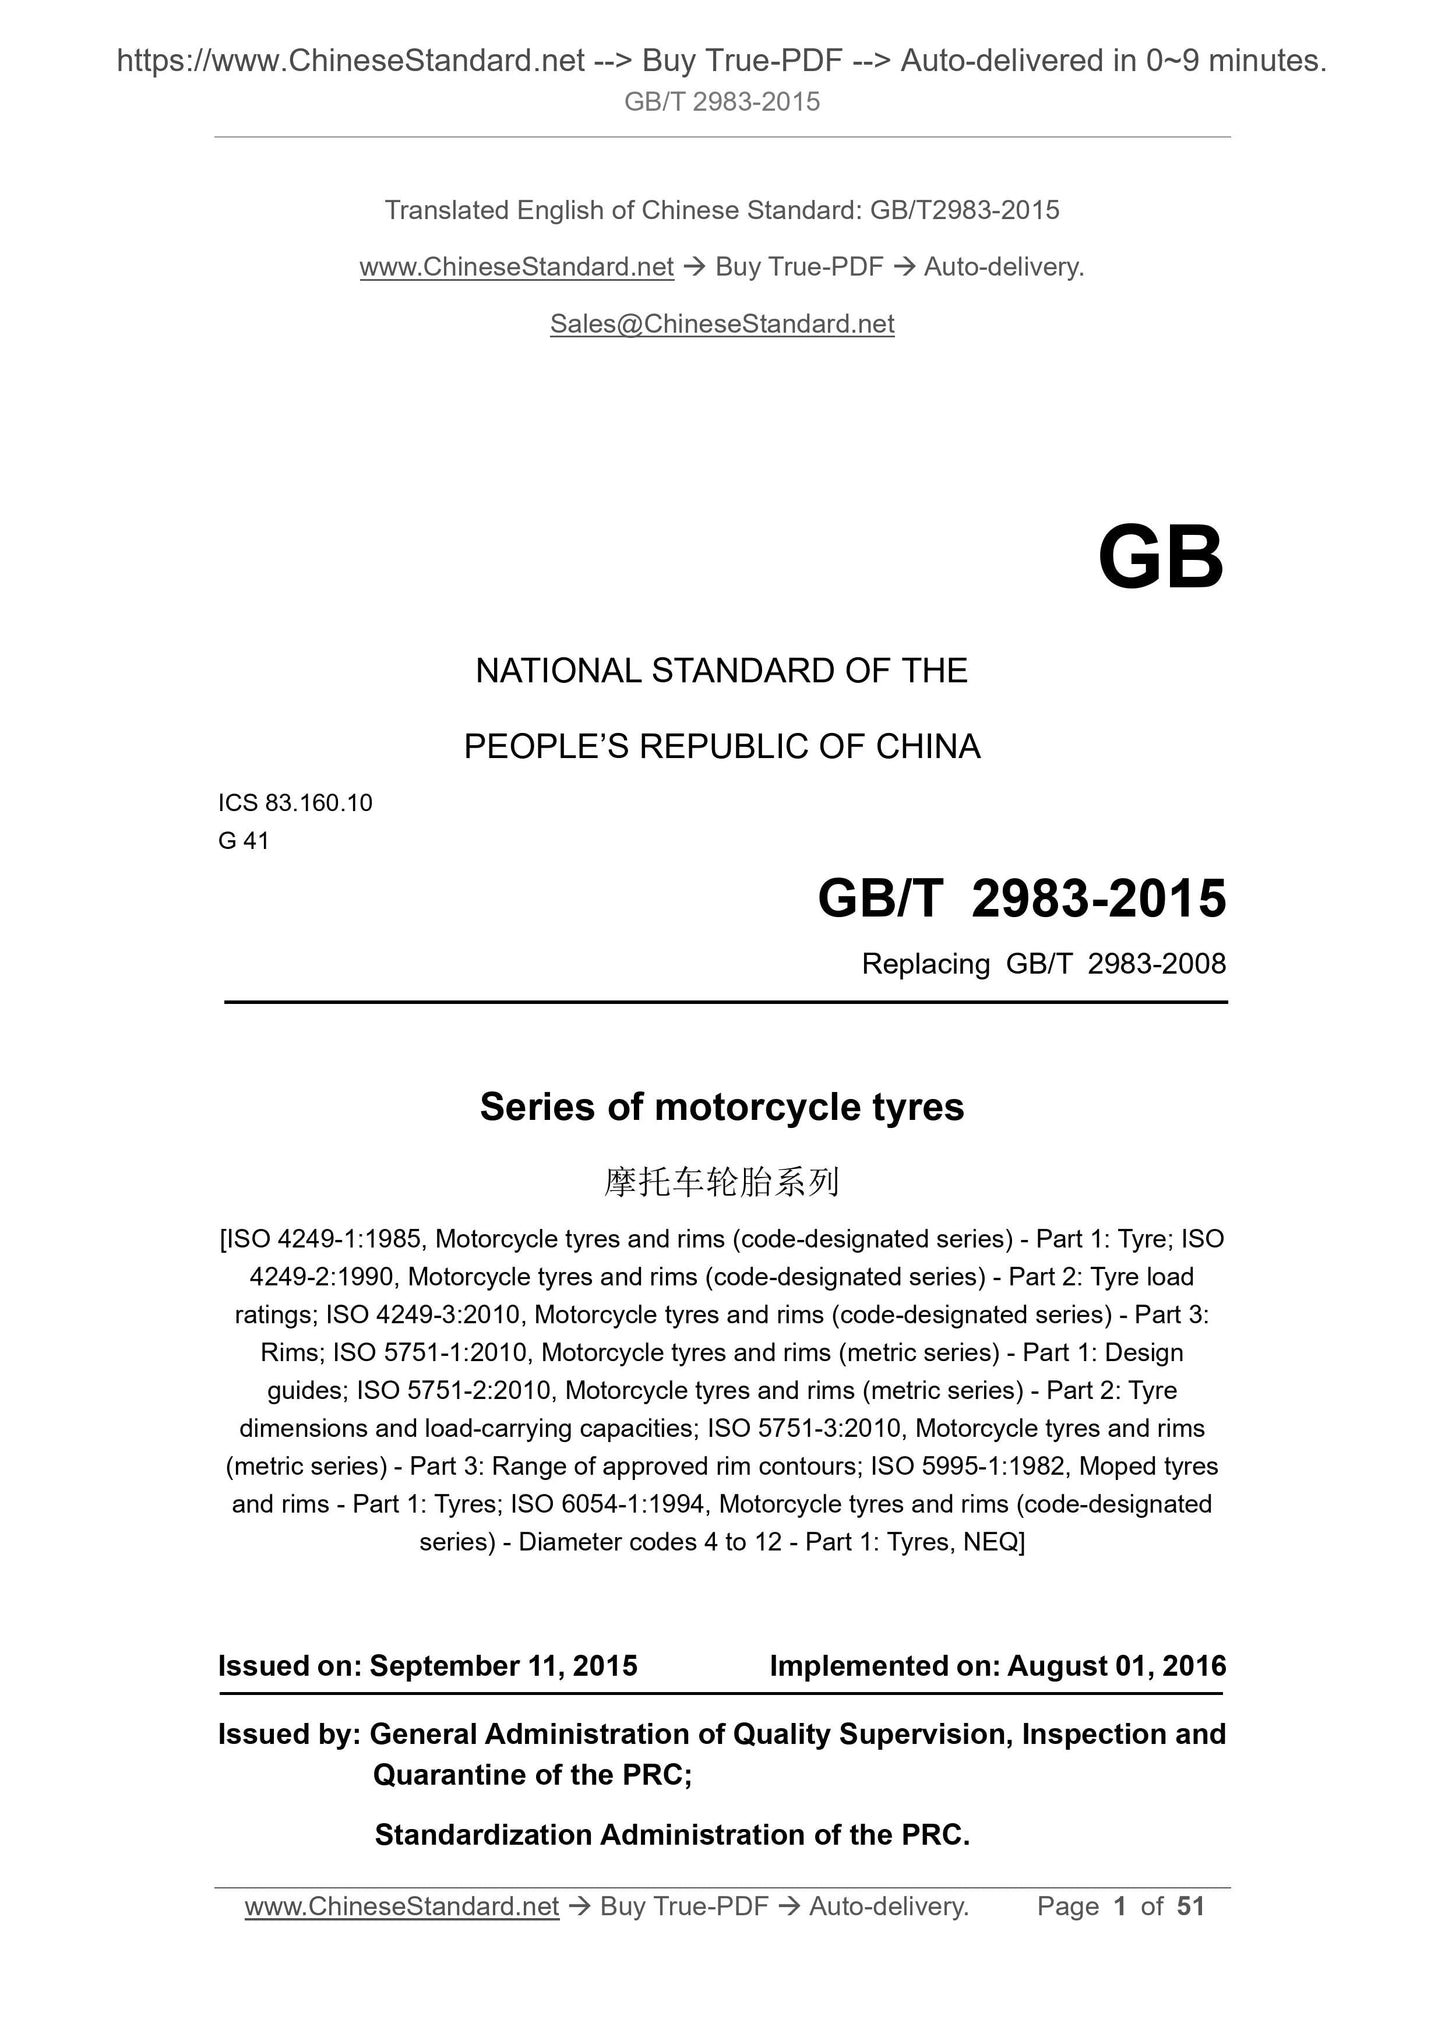 GB/T 2983-2015 Page 1